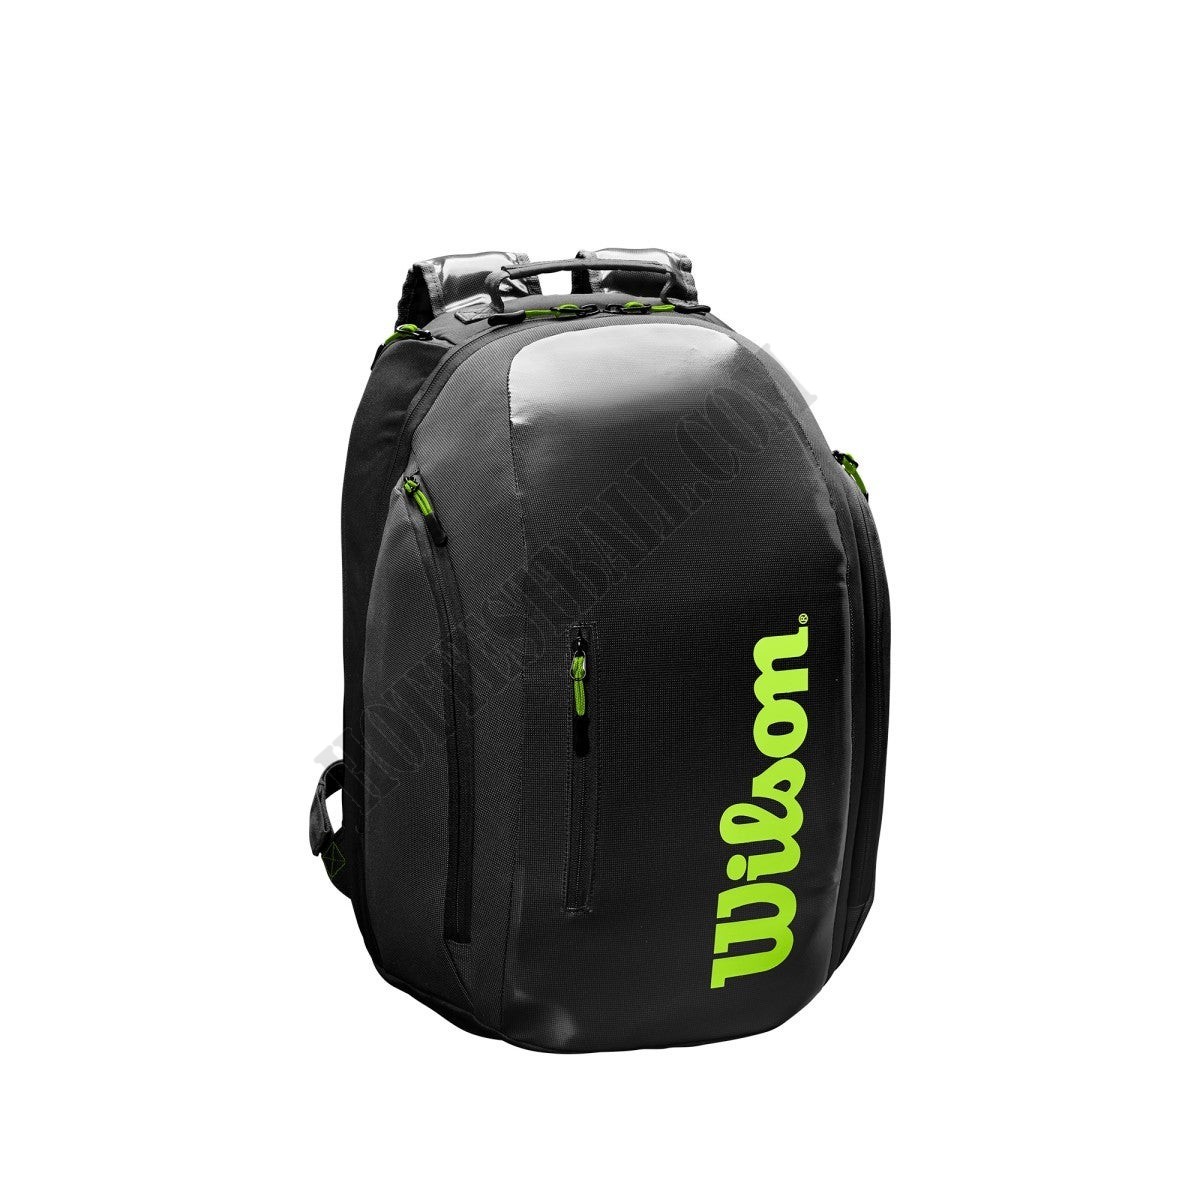 Super Tour Backpack - Wilson Discount Store - -0